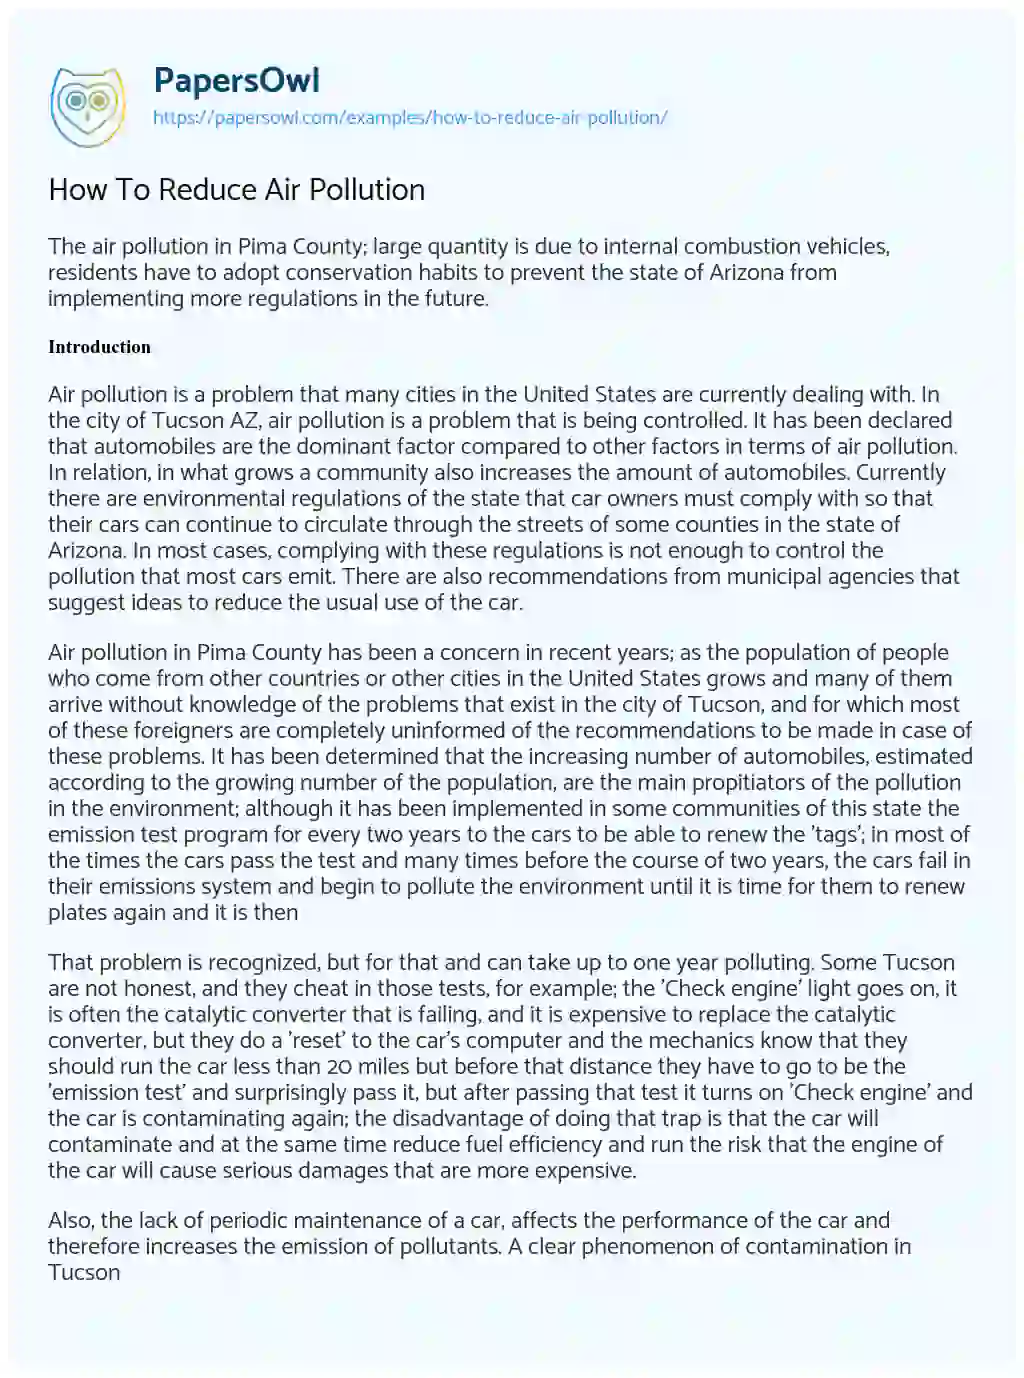 Essay on How to Reduce Air Pollution